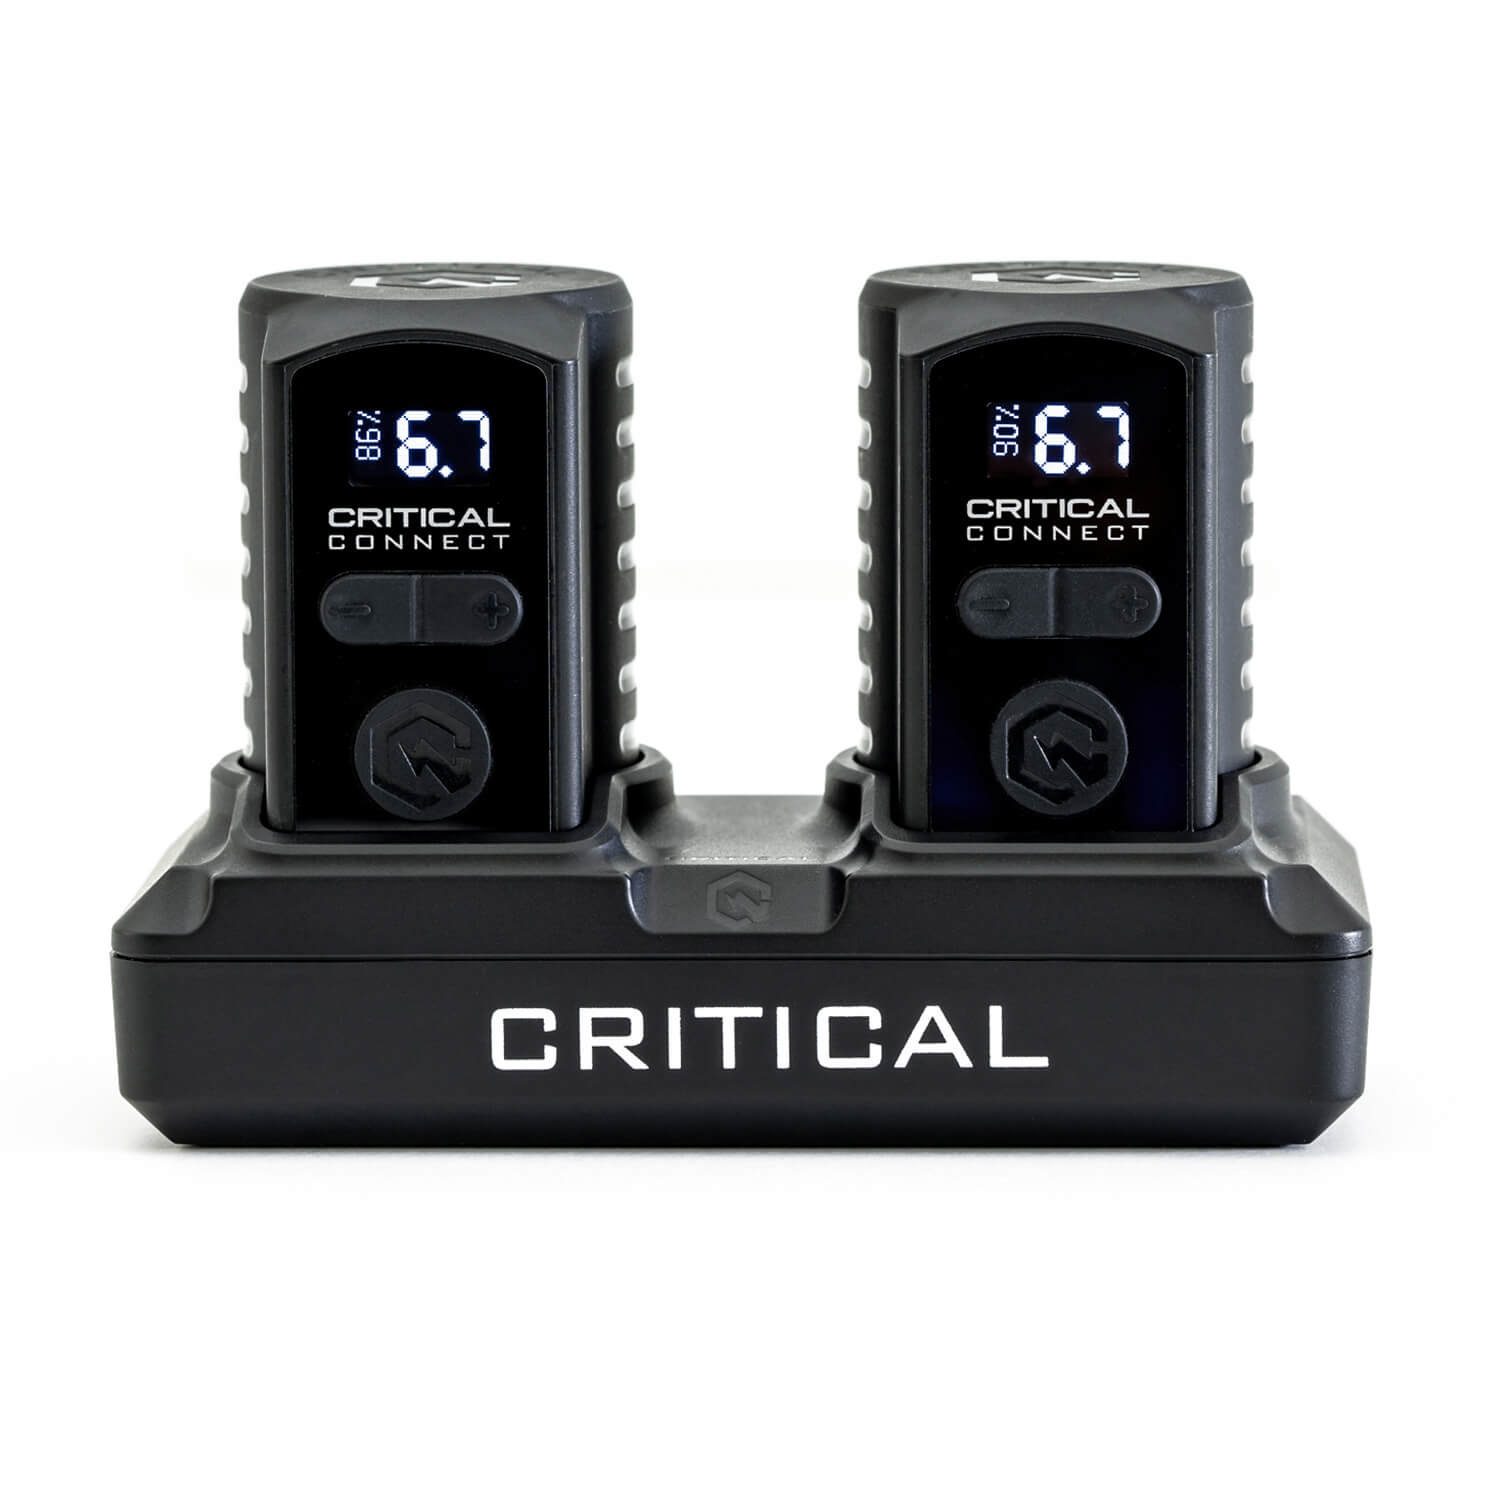 Critical Connect Universal Battery and Dock Bundle with the batteries charging.